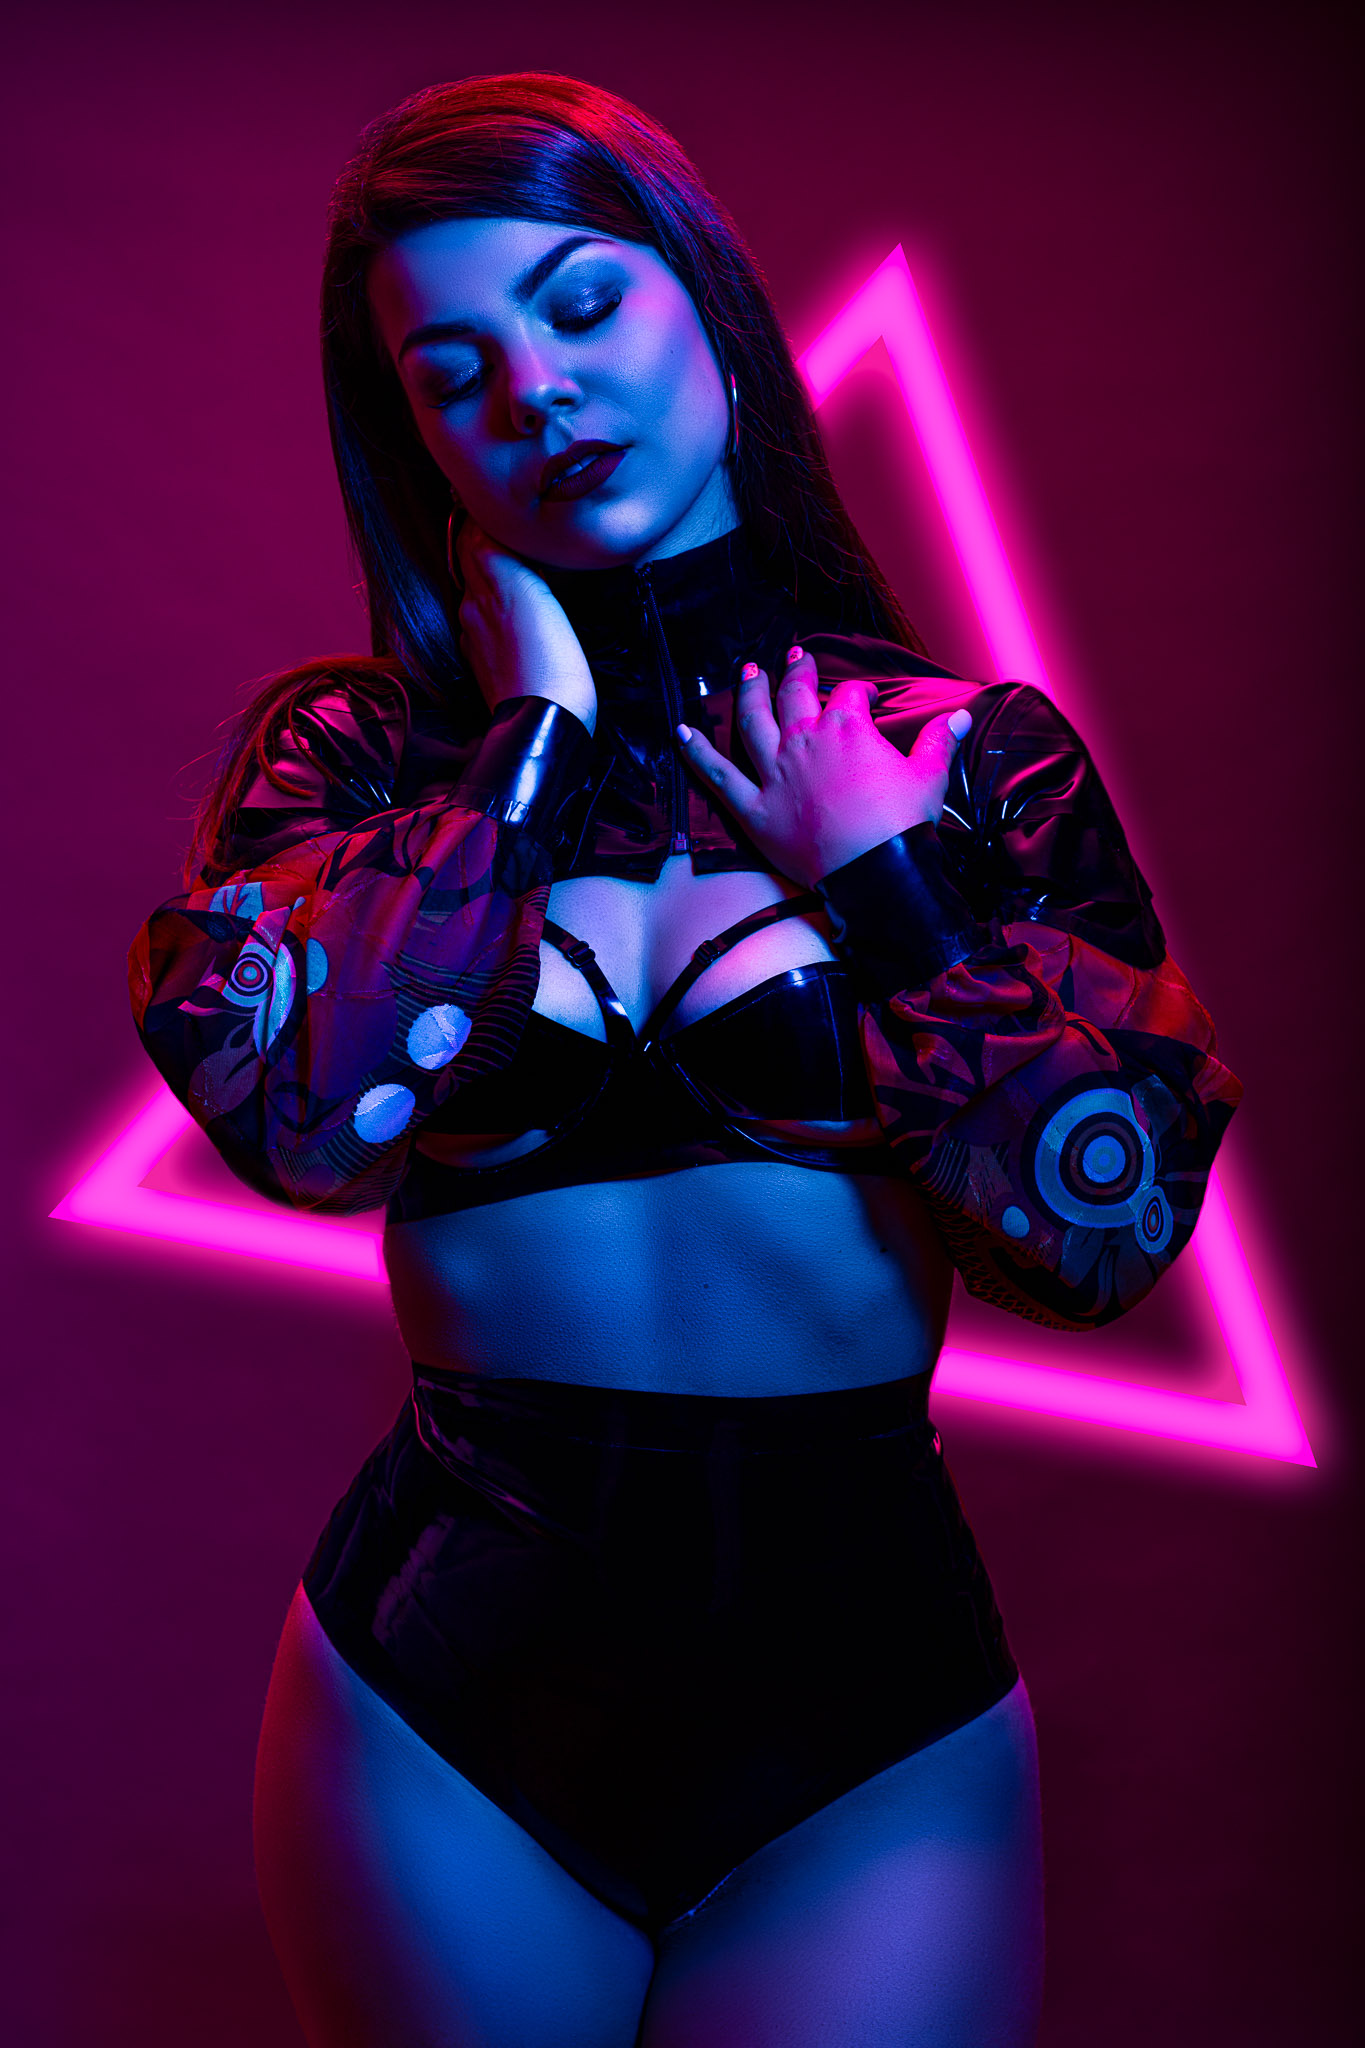 Cool Latex, Cool Color Gel Lights &amp; Model Axelle